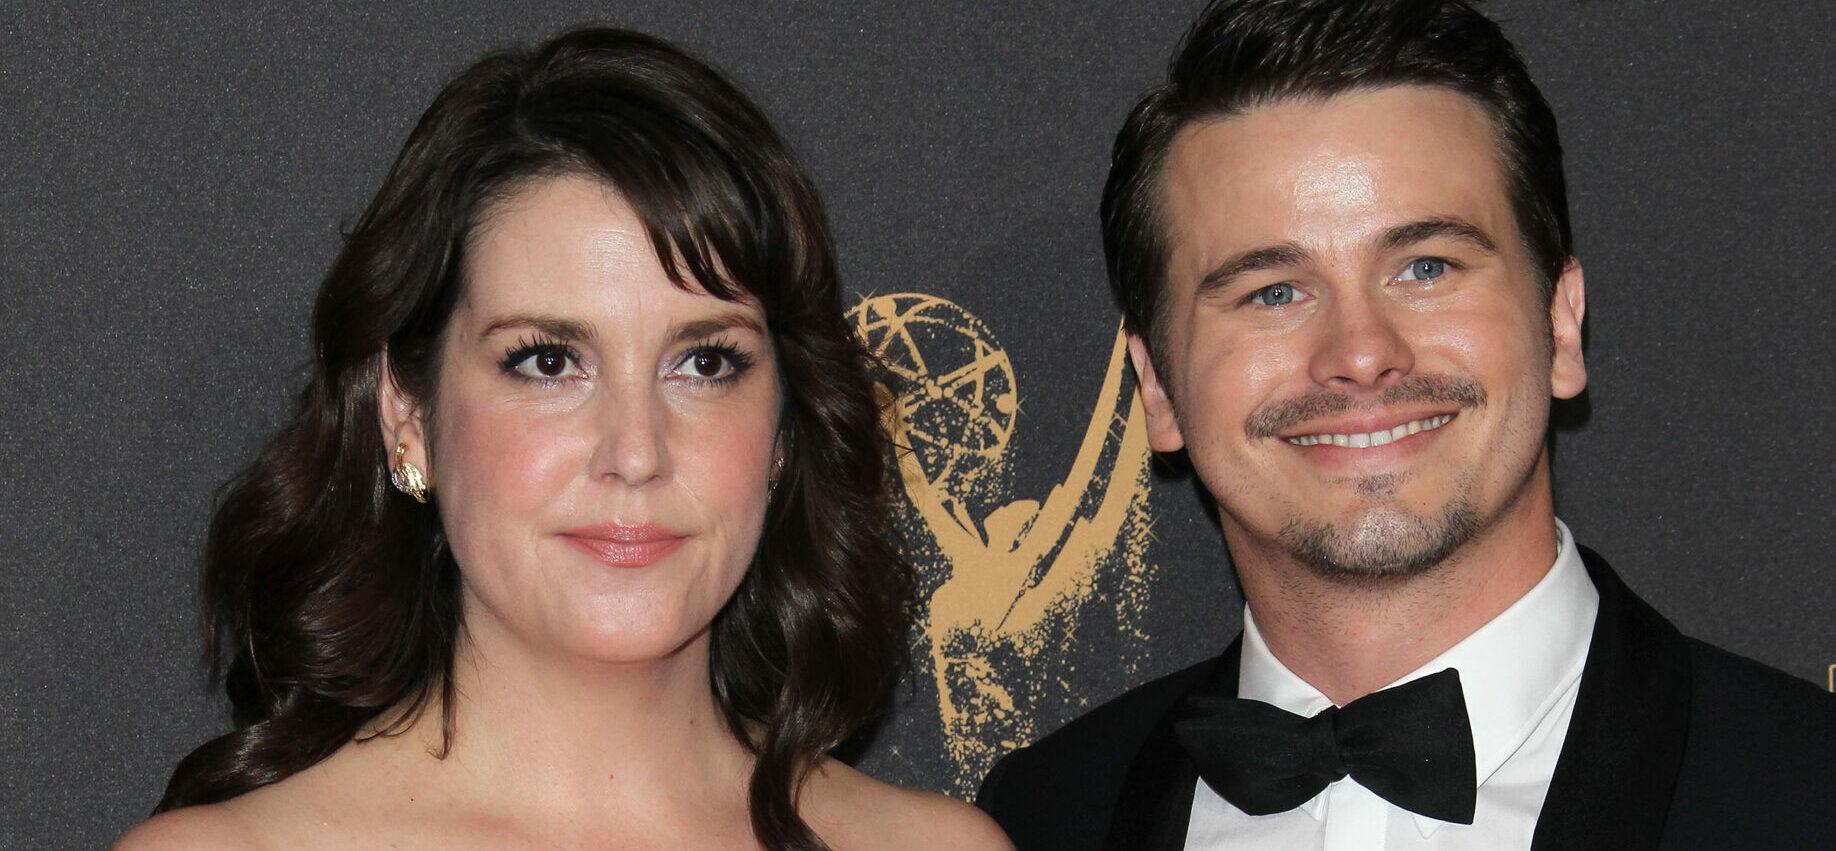 Melanie Lynskey & Husband Jason Ritter Confront Body Shaming: ‘Swan Dive Directly Into The Sun’